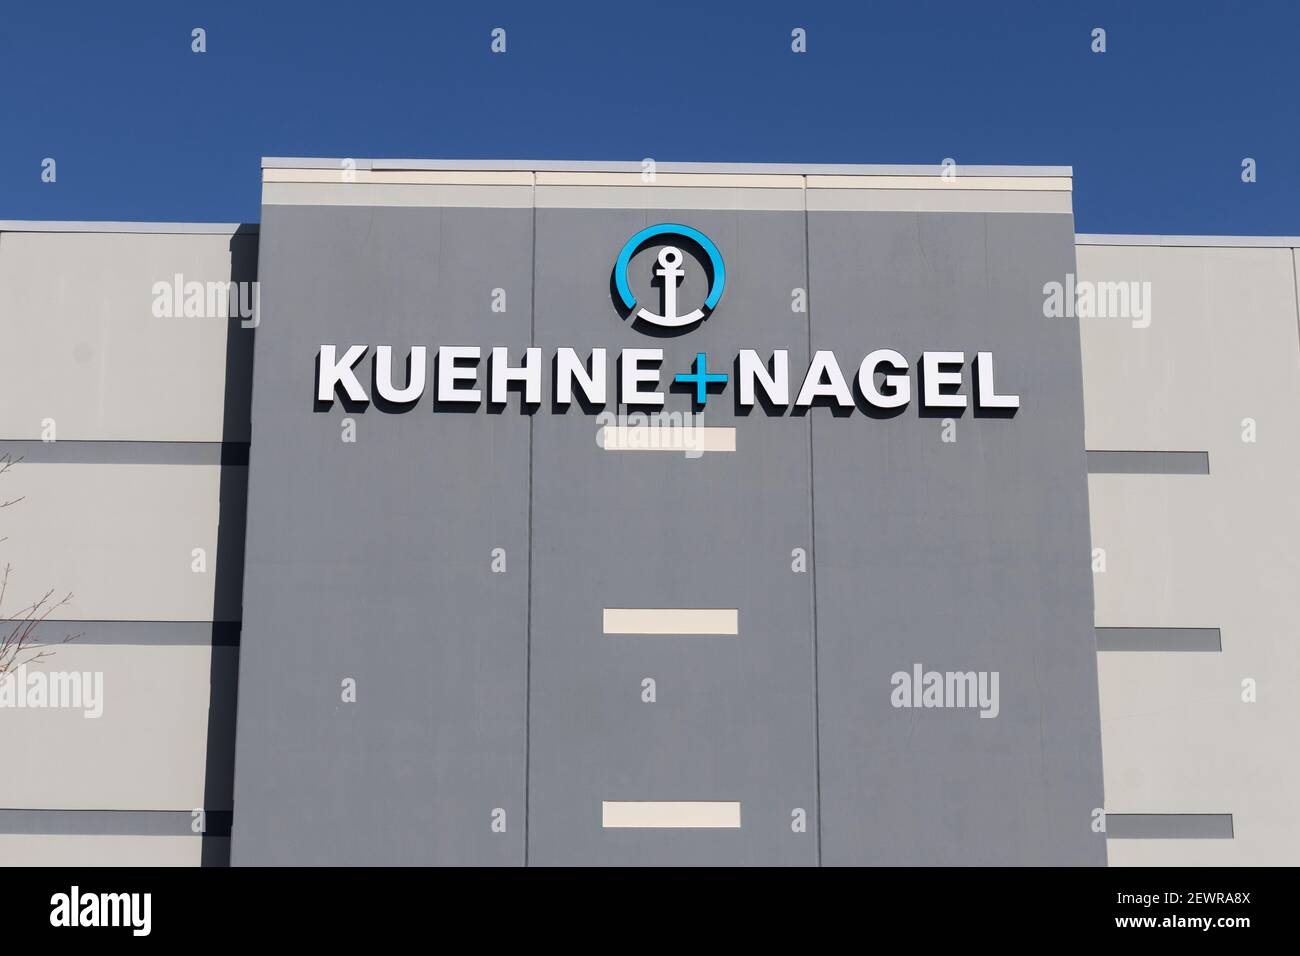 Whitestown - Circa March 2021: Kuehne + Nagel transport and freight forwarding location. Kuehne + Nagel is based in Bremen, Germany. Stock Photo